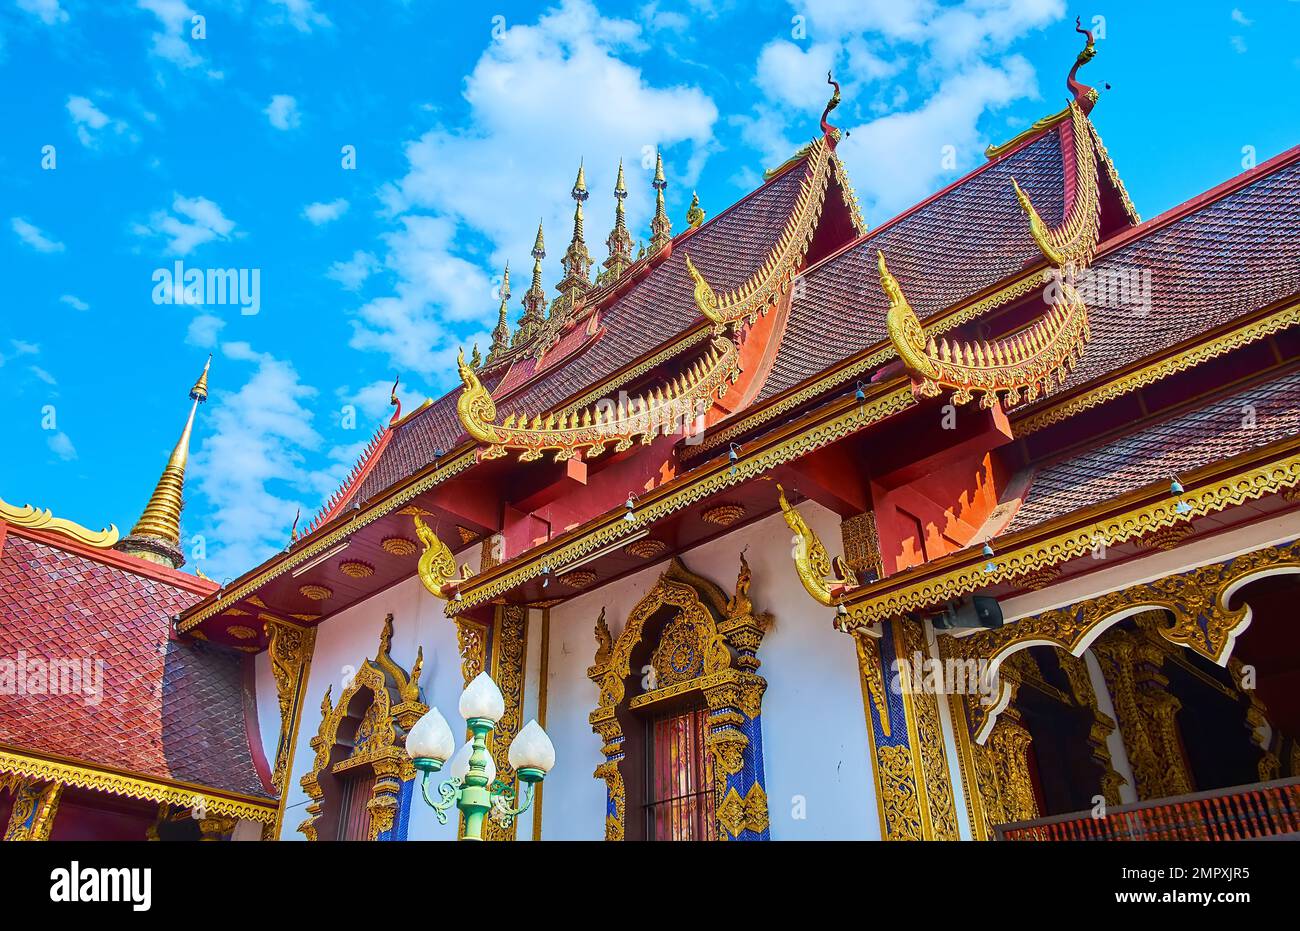 The carved gilt bargeboards, sculptured chofas and the hti umbrellas atop the red tile roof of the Viharn in Wat Saen Muang Ma temple, Chiang Mai, Tha Stock Photo